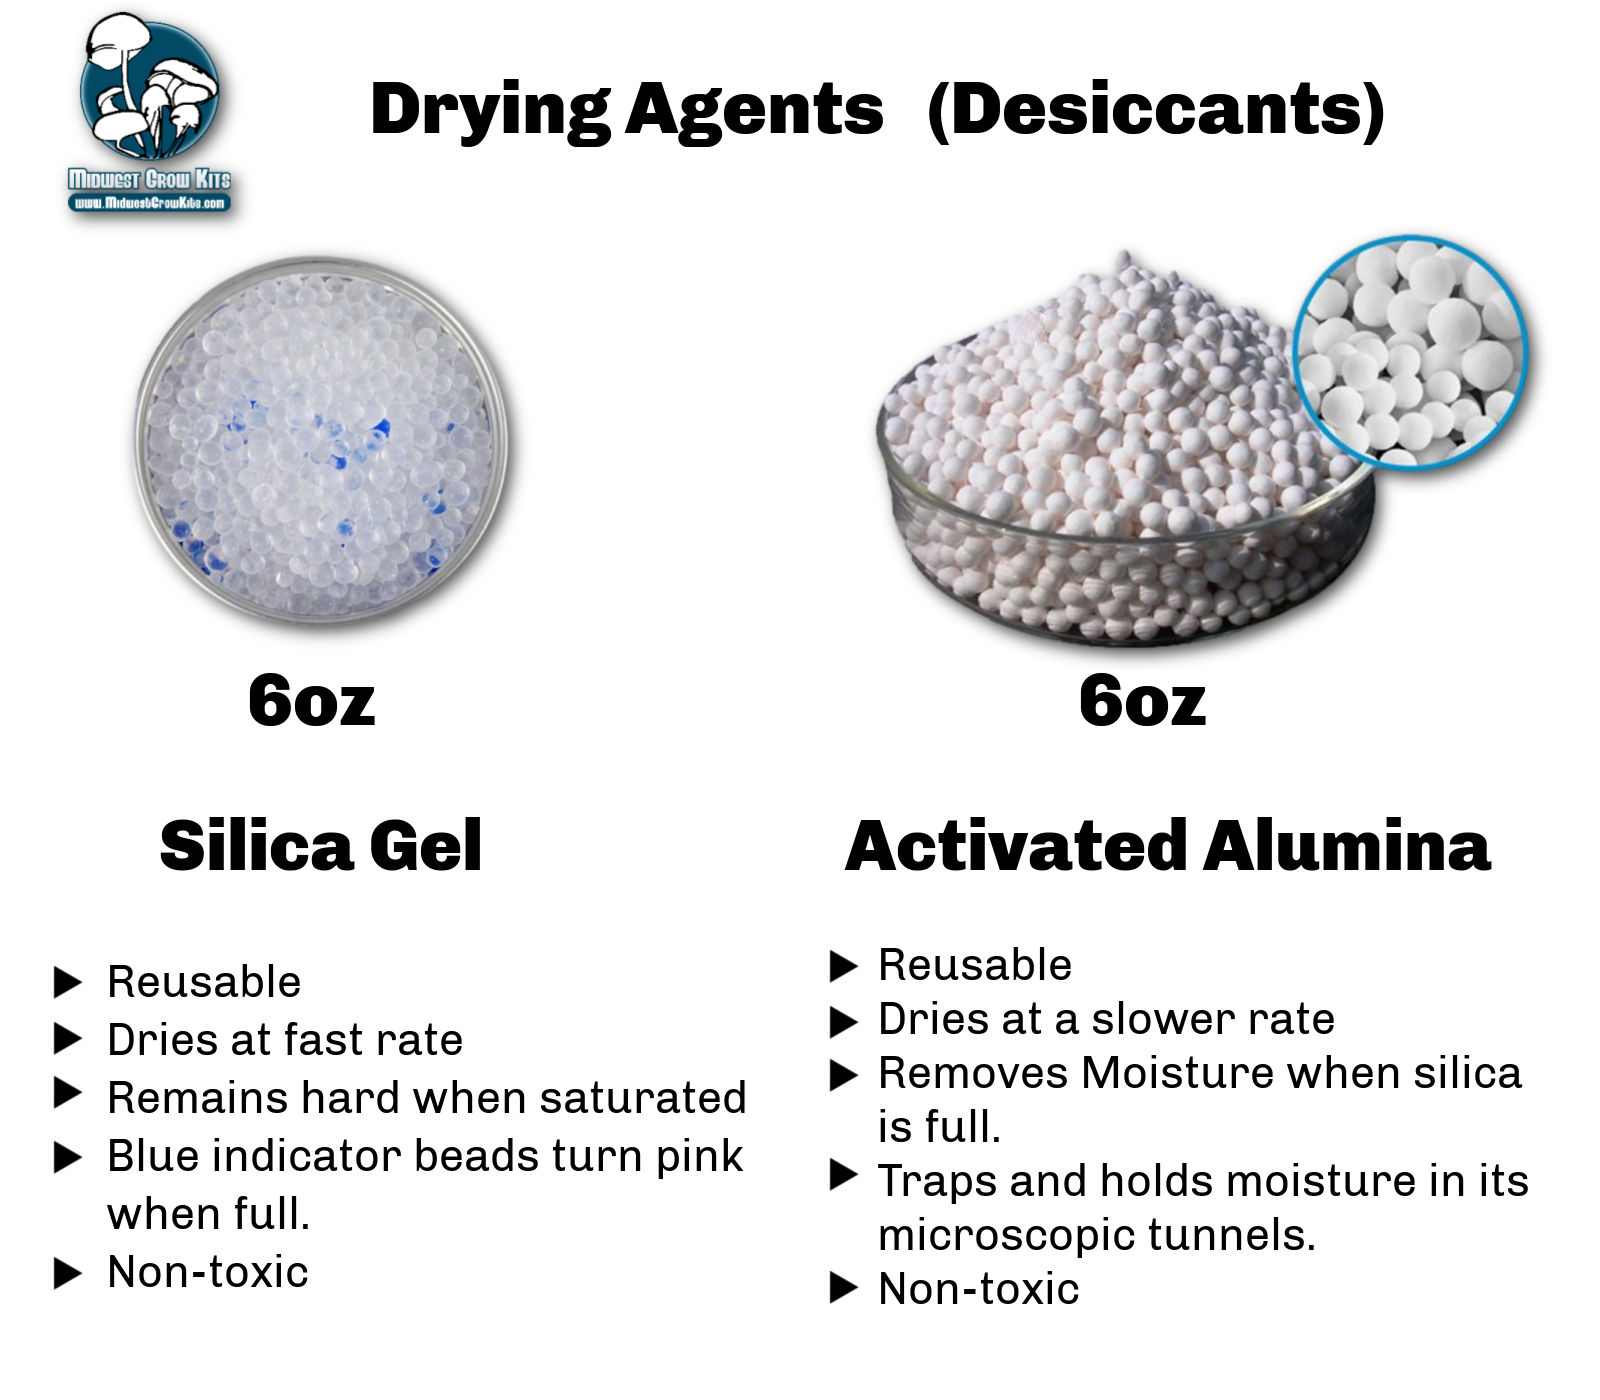 Desiccants for Drying Kit - 6oz Activated Alumina & 6oz Silica Gel